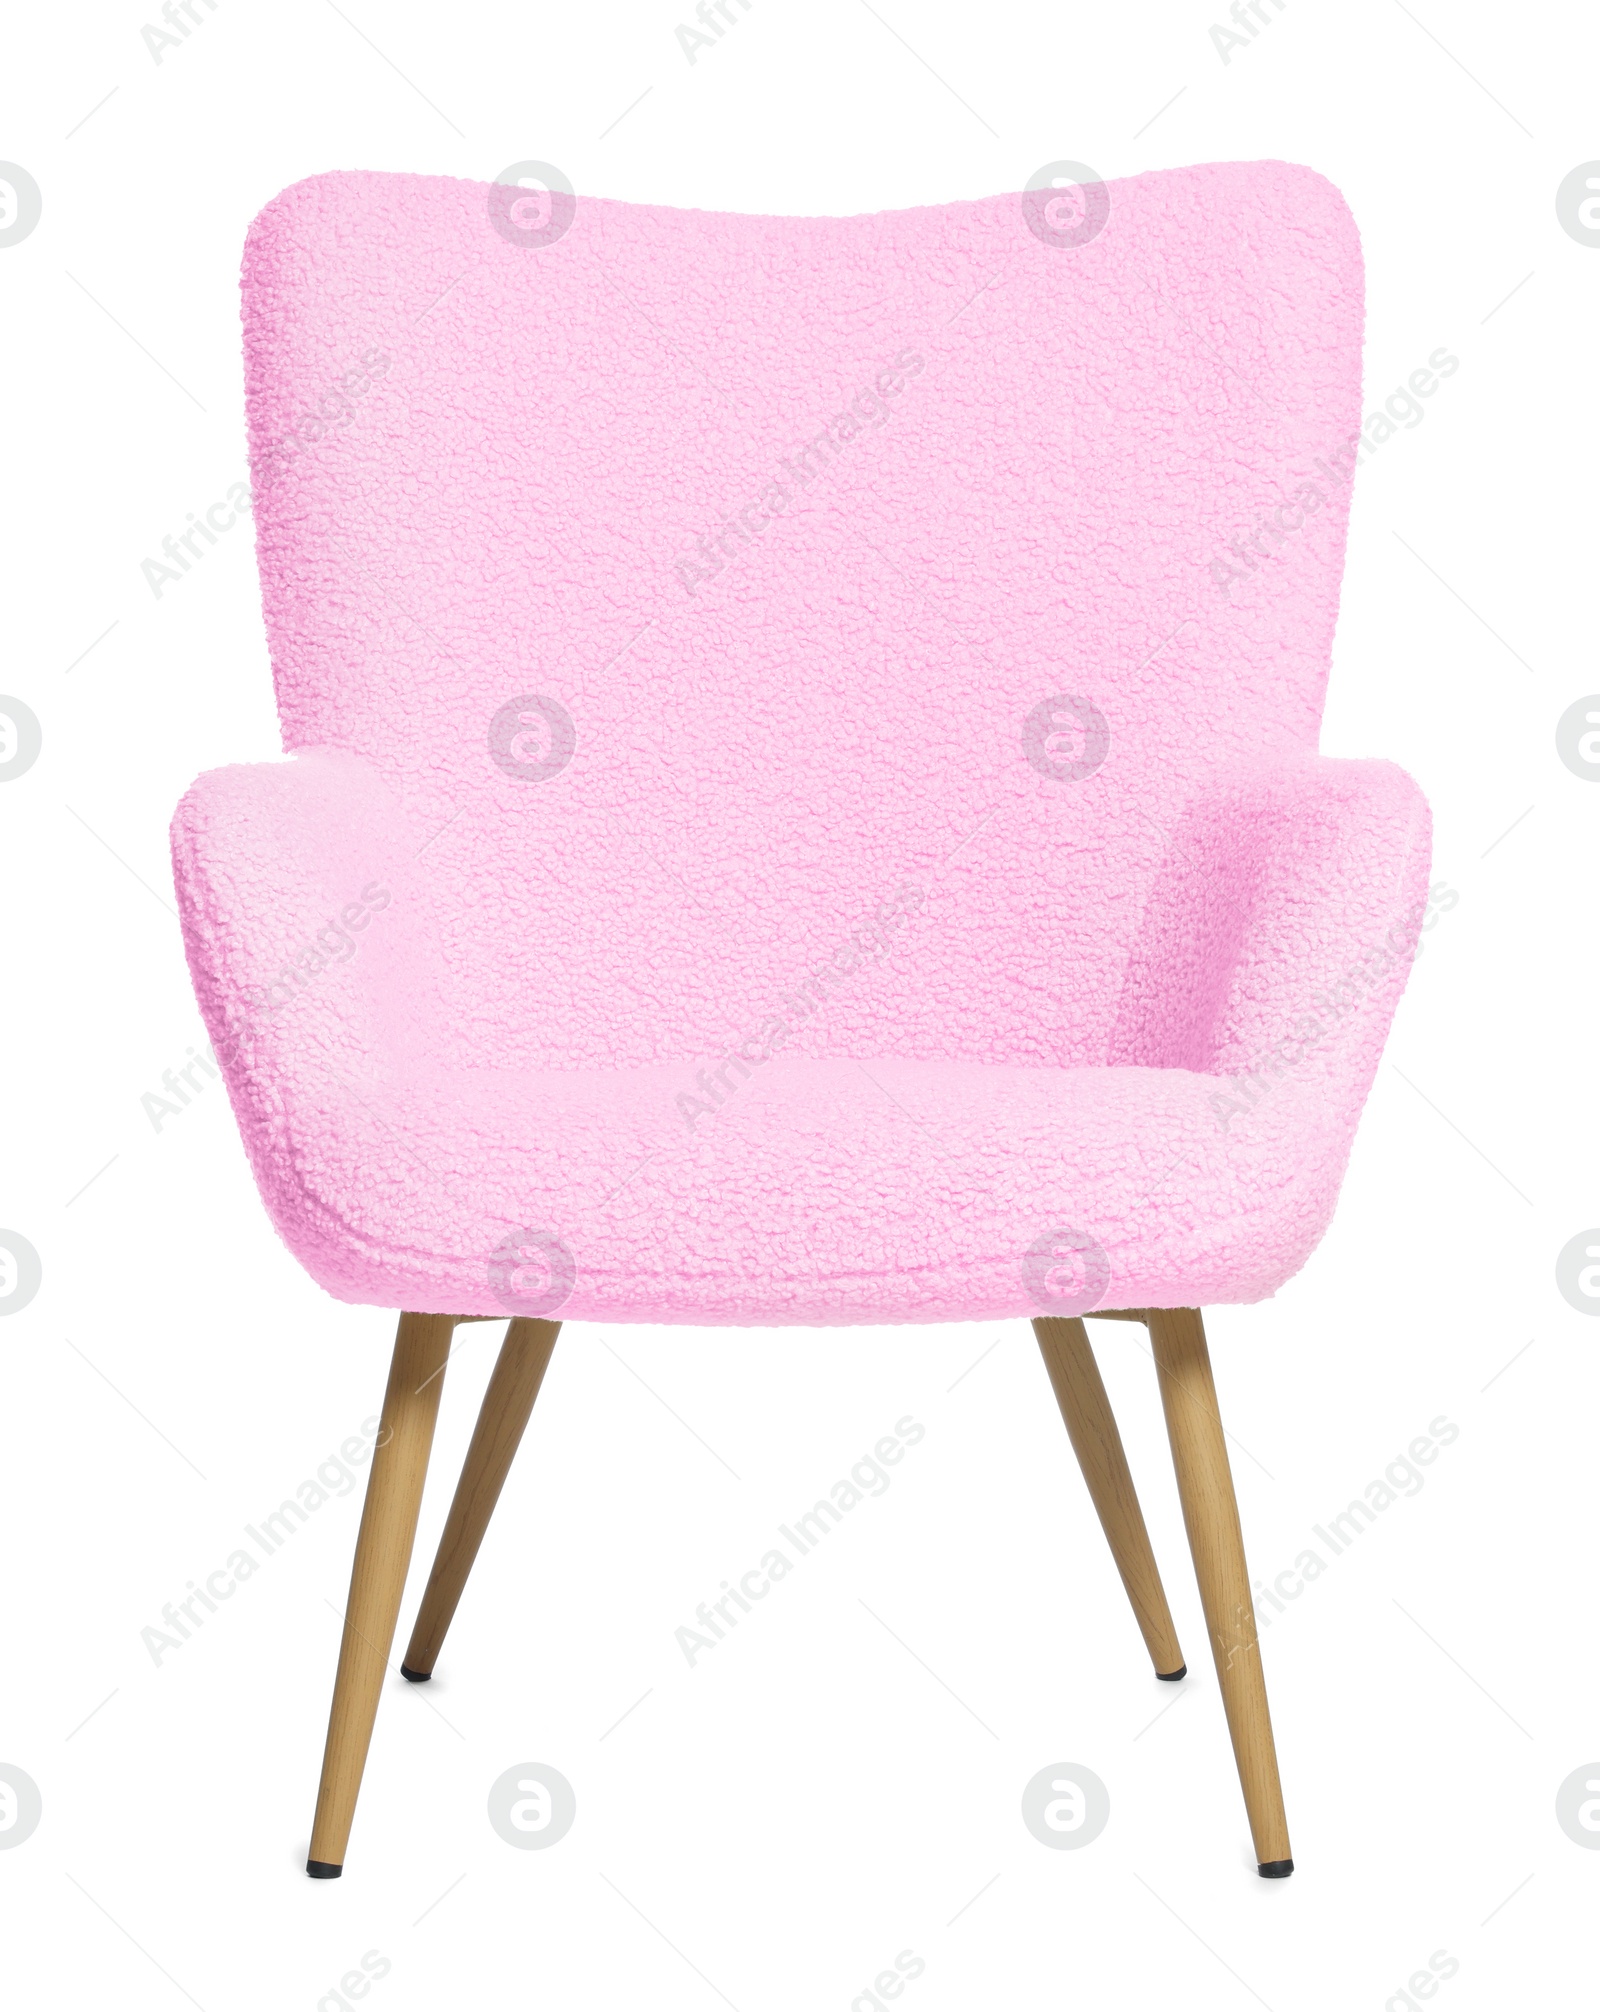 Image of One comfortable light pink armchair isolated on white